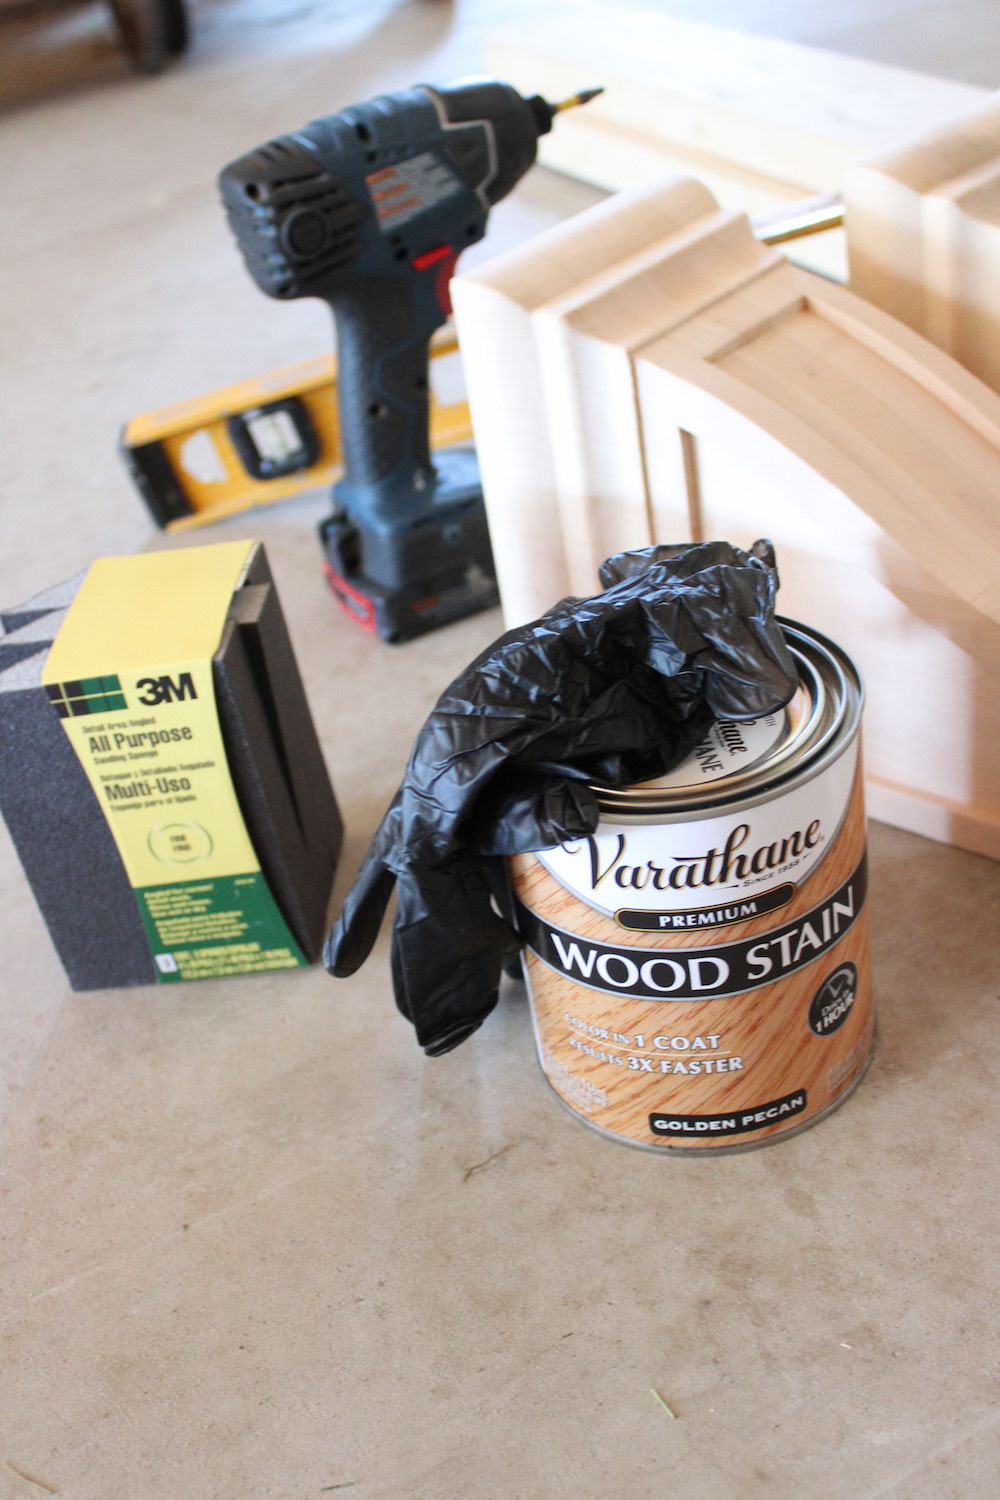 Various tools and materials needed to build and stain a wood shelf such as Varathane wood stain.